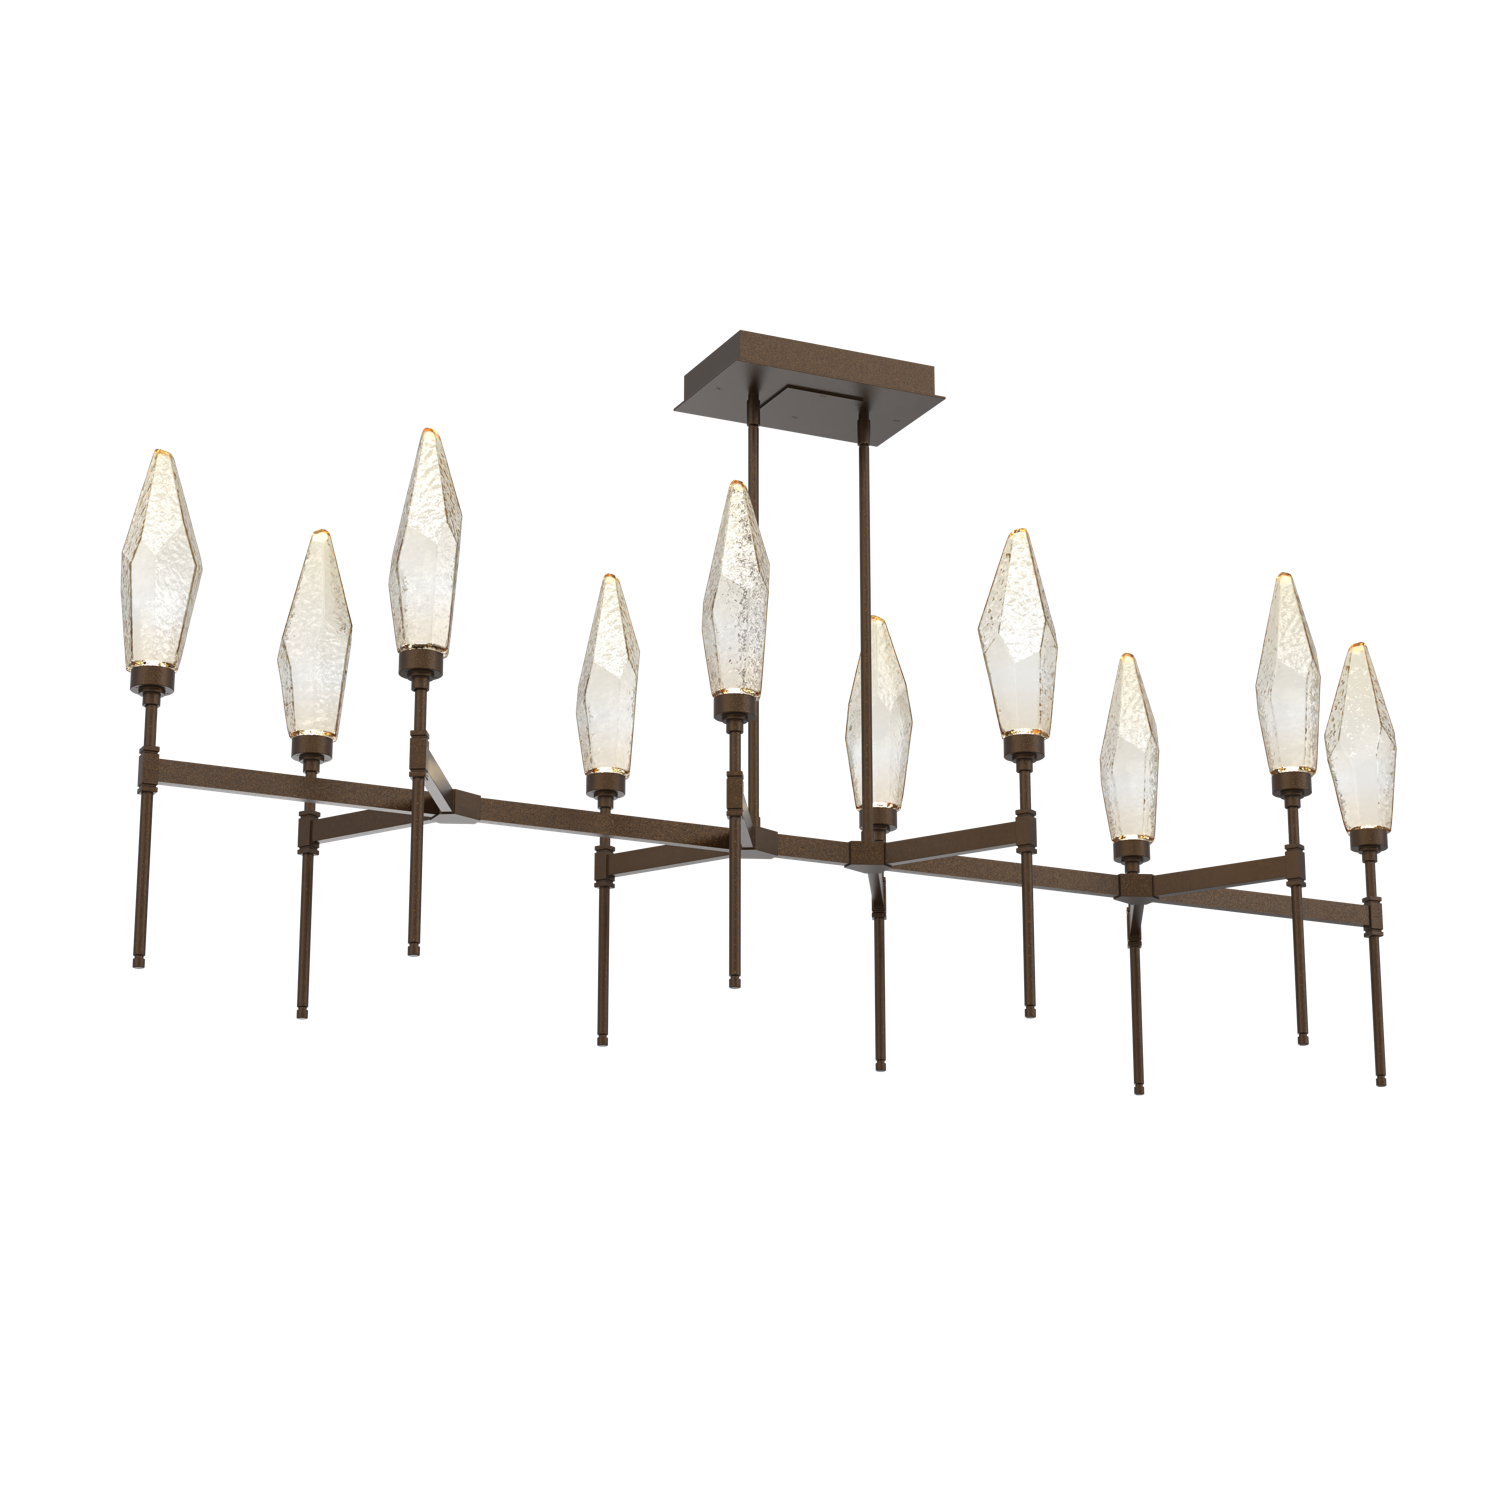 PLB0050-67-FB-CA-Hammerton-Studio-Rock-Crystal-67-inch-linear-belvedere-chandelier-with-flat-bronze-finish-and-chilled-amber-blown-glass-shades-and-LED-lamping